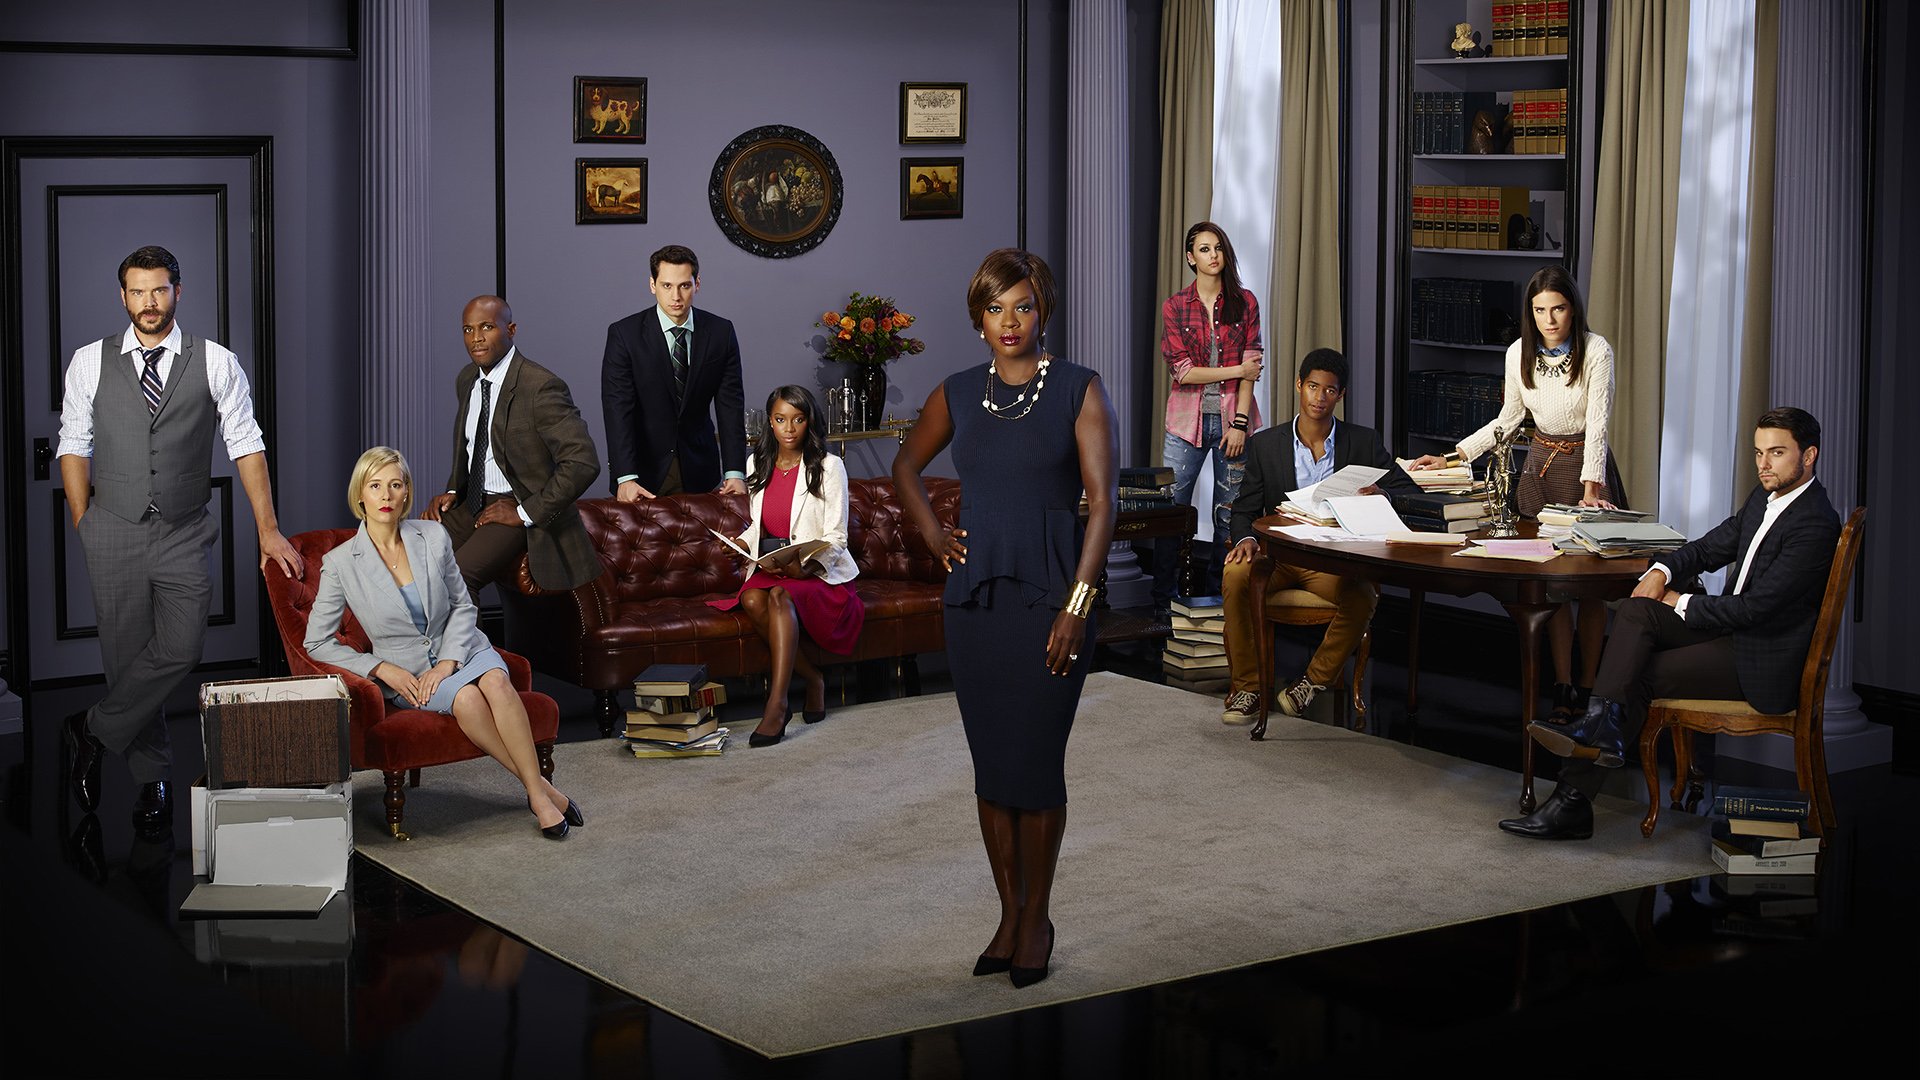 8 How To Get Away With Murder Hd Wallpapers Background Images Images, Photos, Reviews